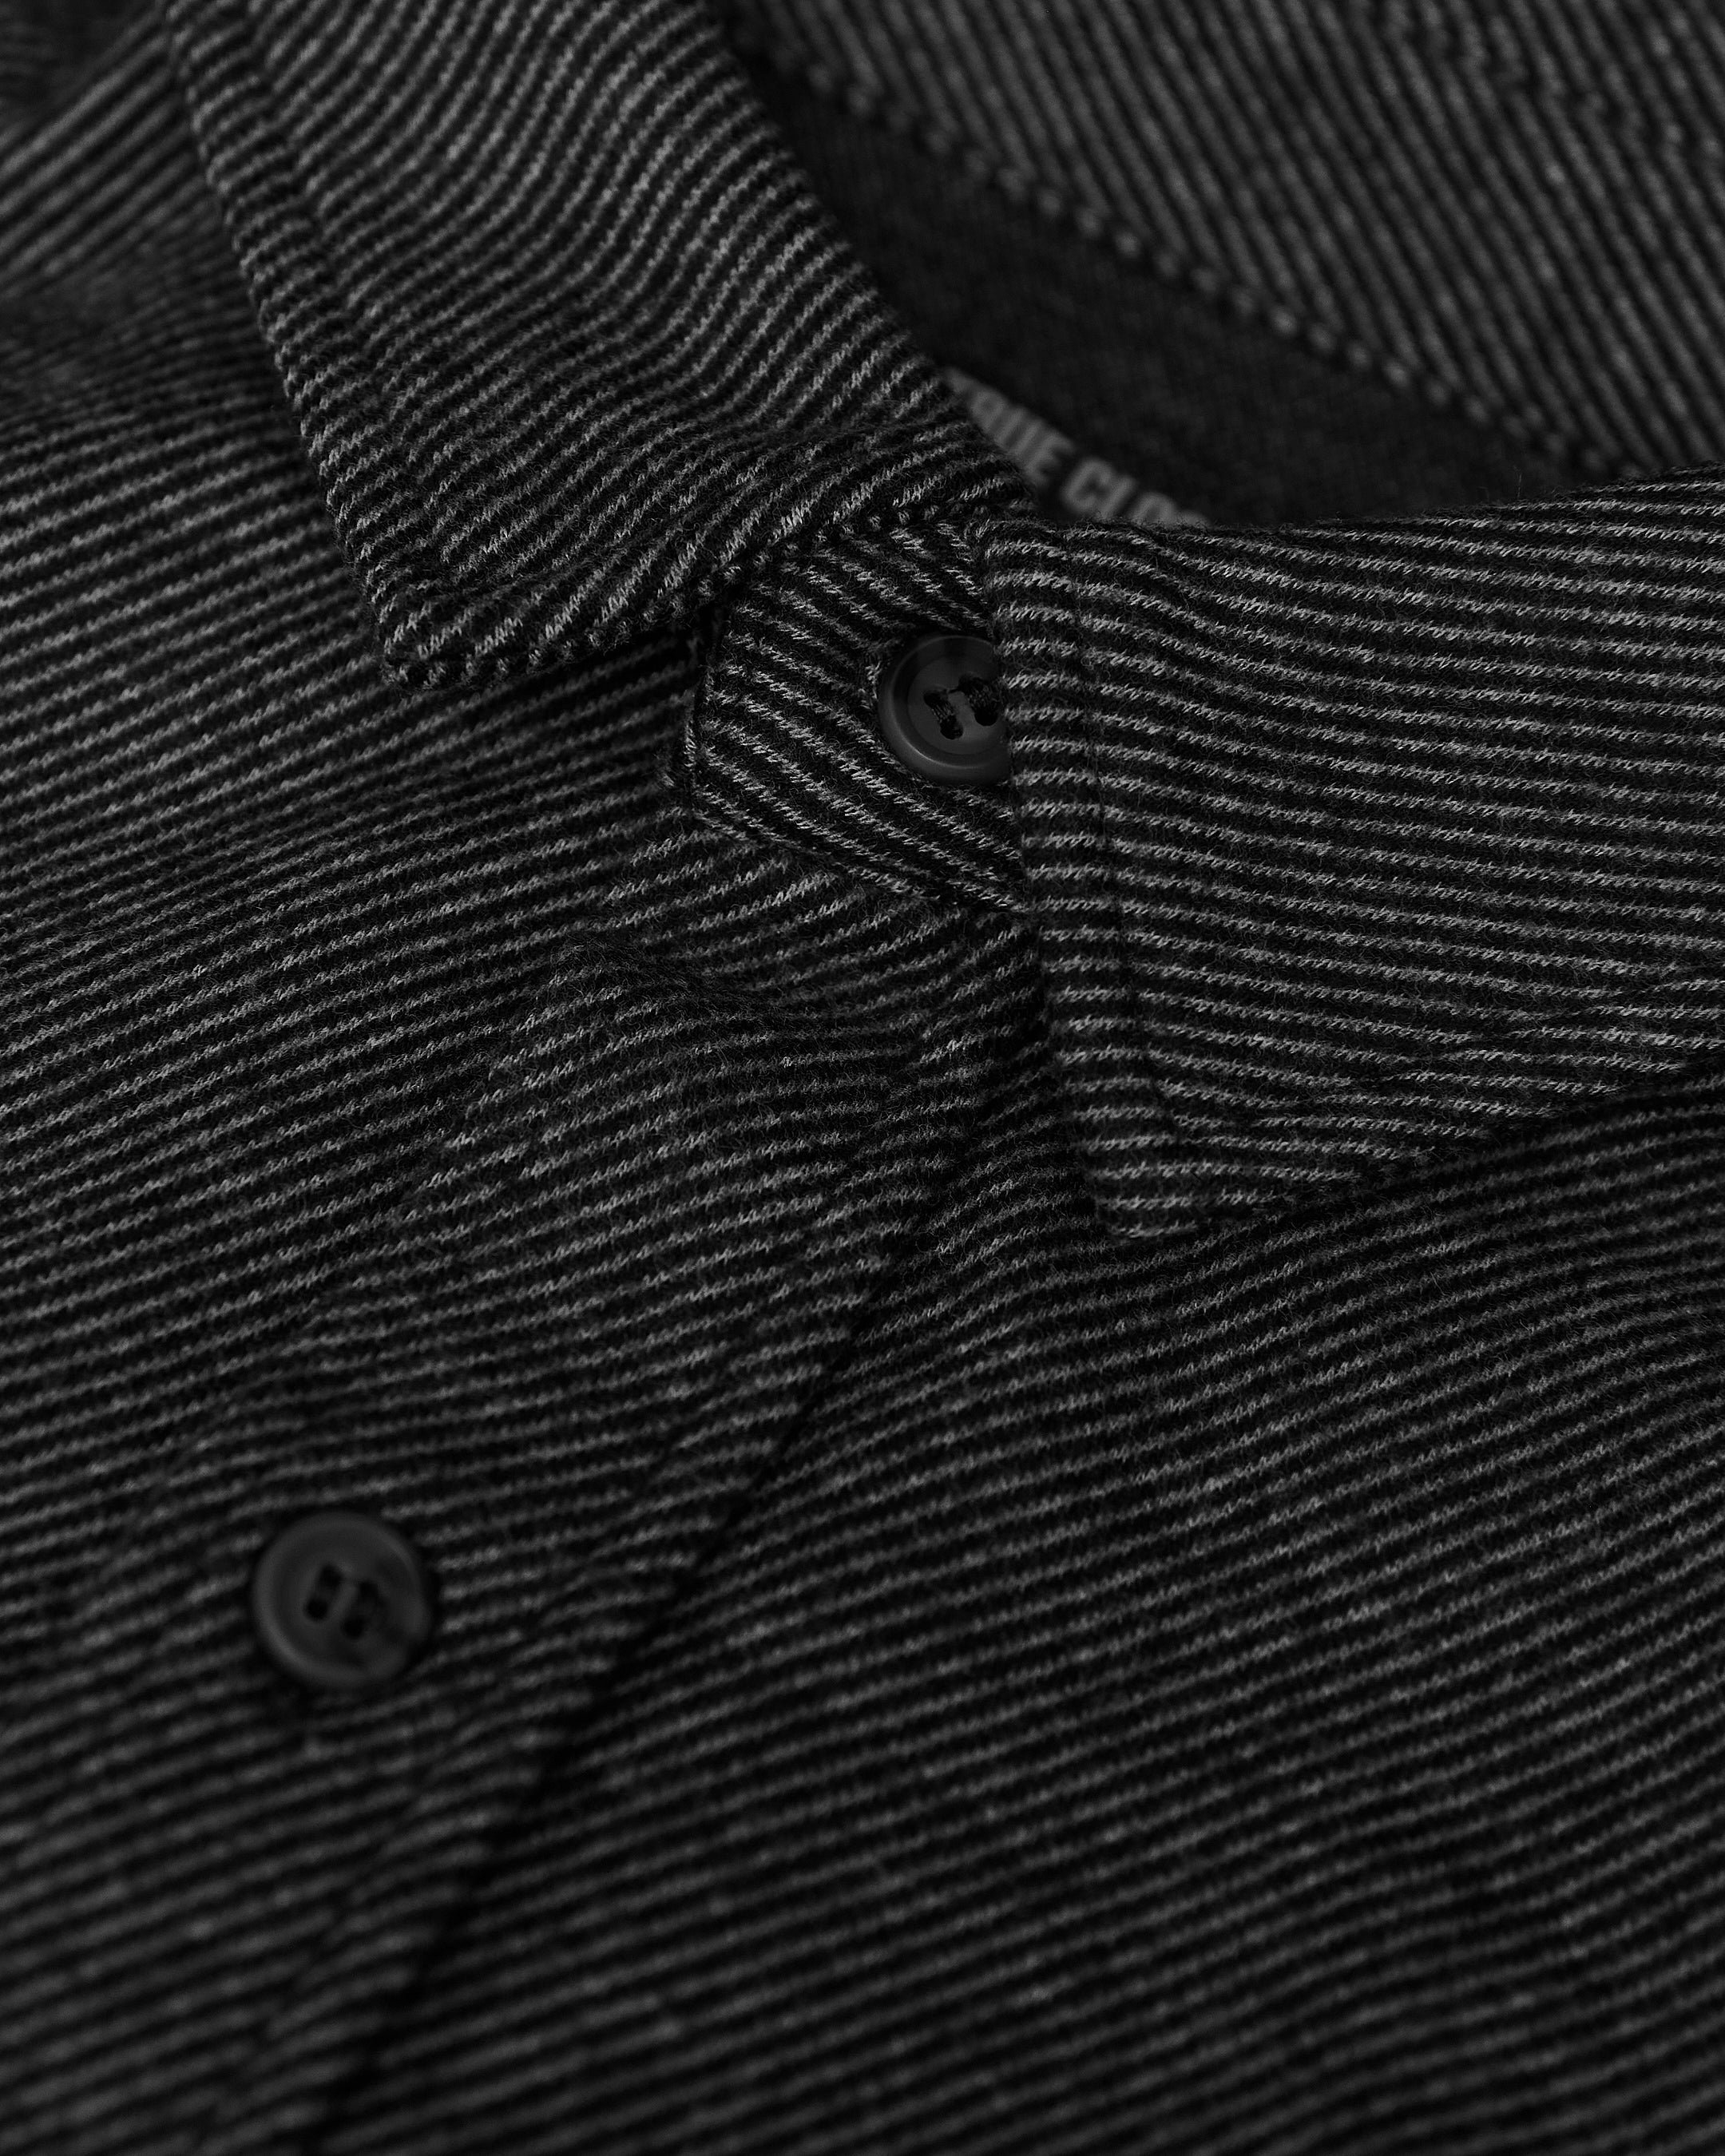 Black and Carbon Sweater Button Up Shirt